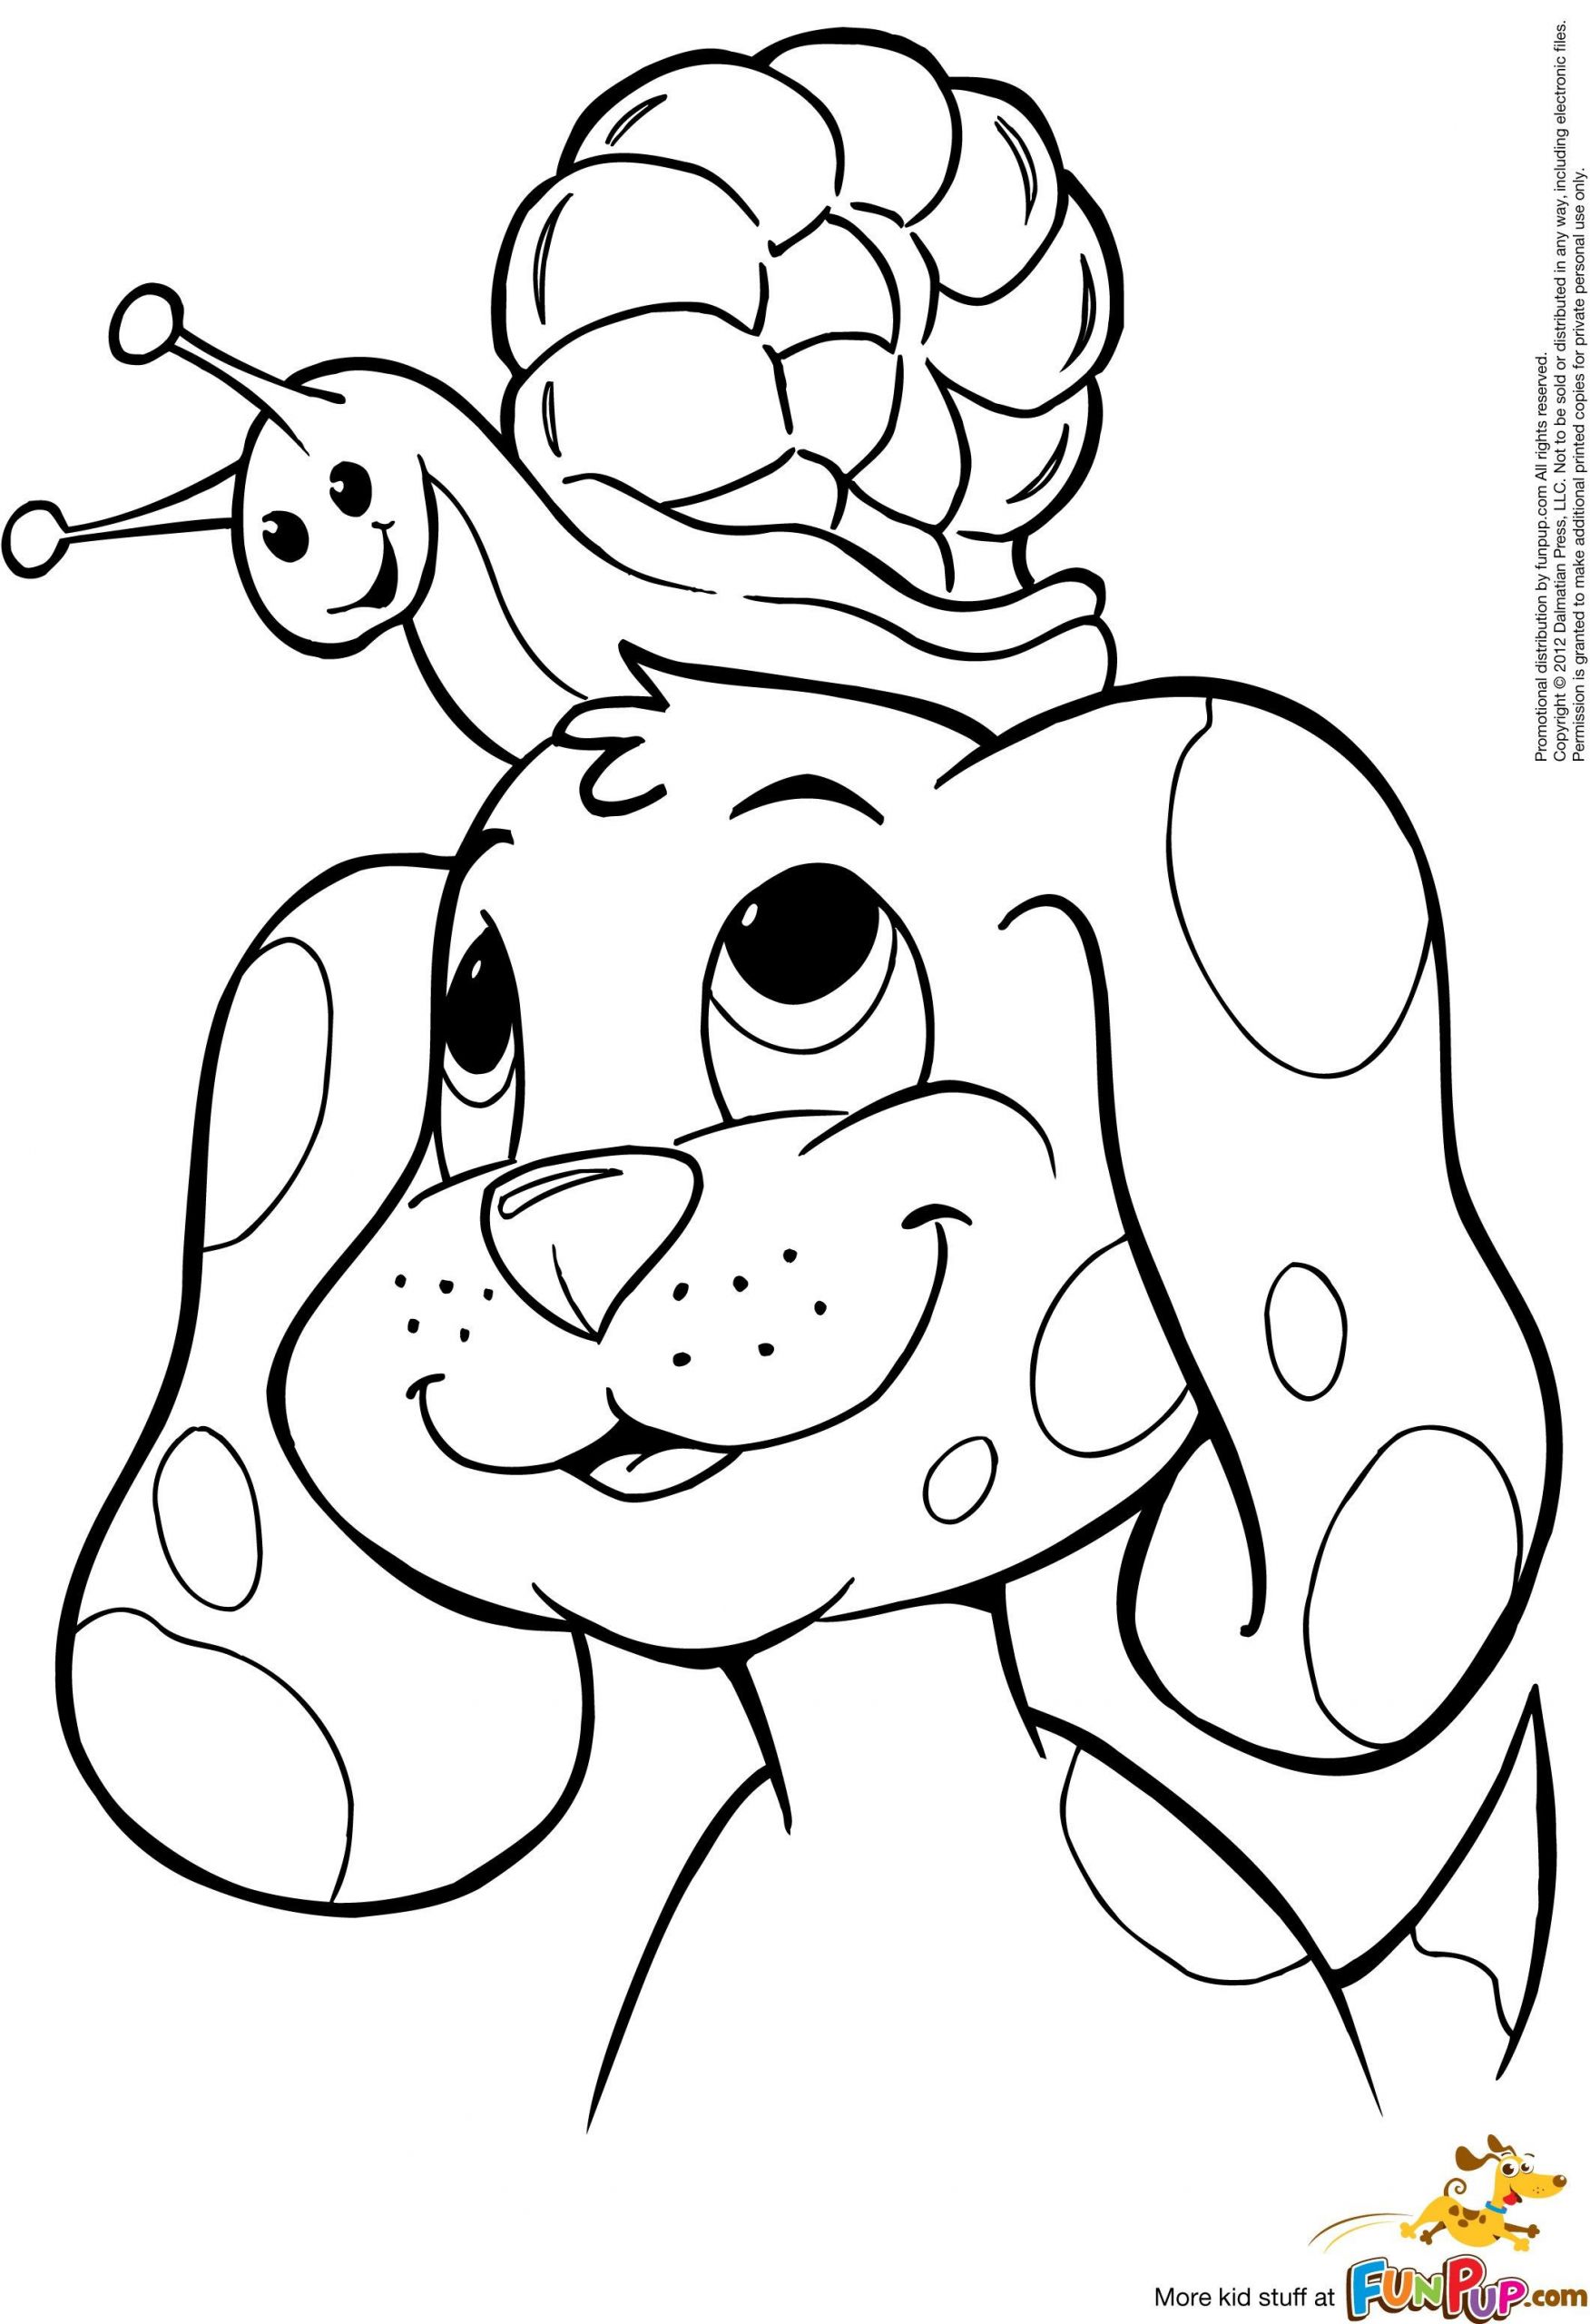 Dog Coloring Pages For Boys
 Puppy 1 0 colouring pages Clip Art Miscellaneous